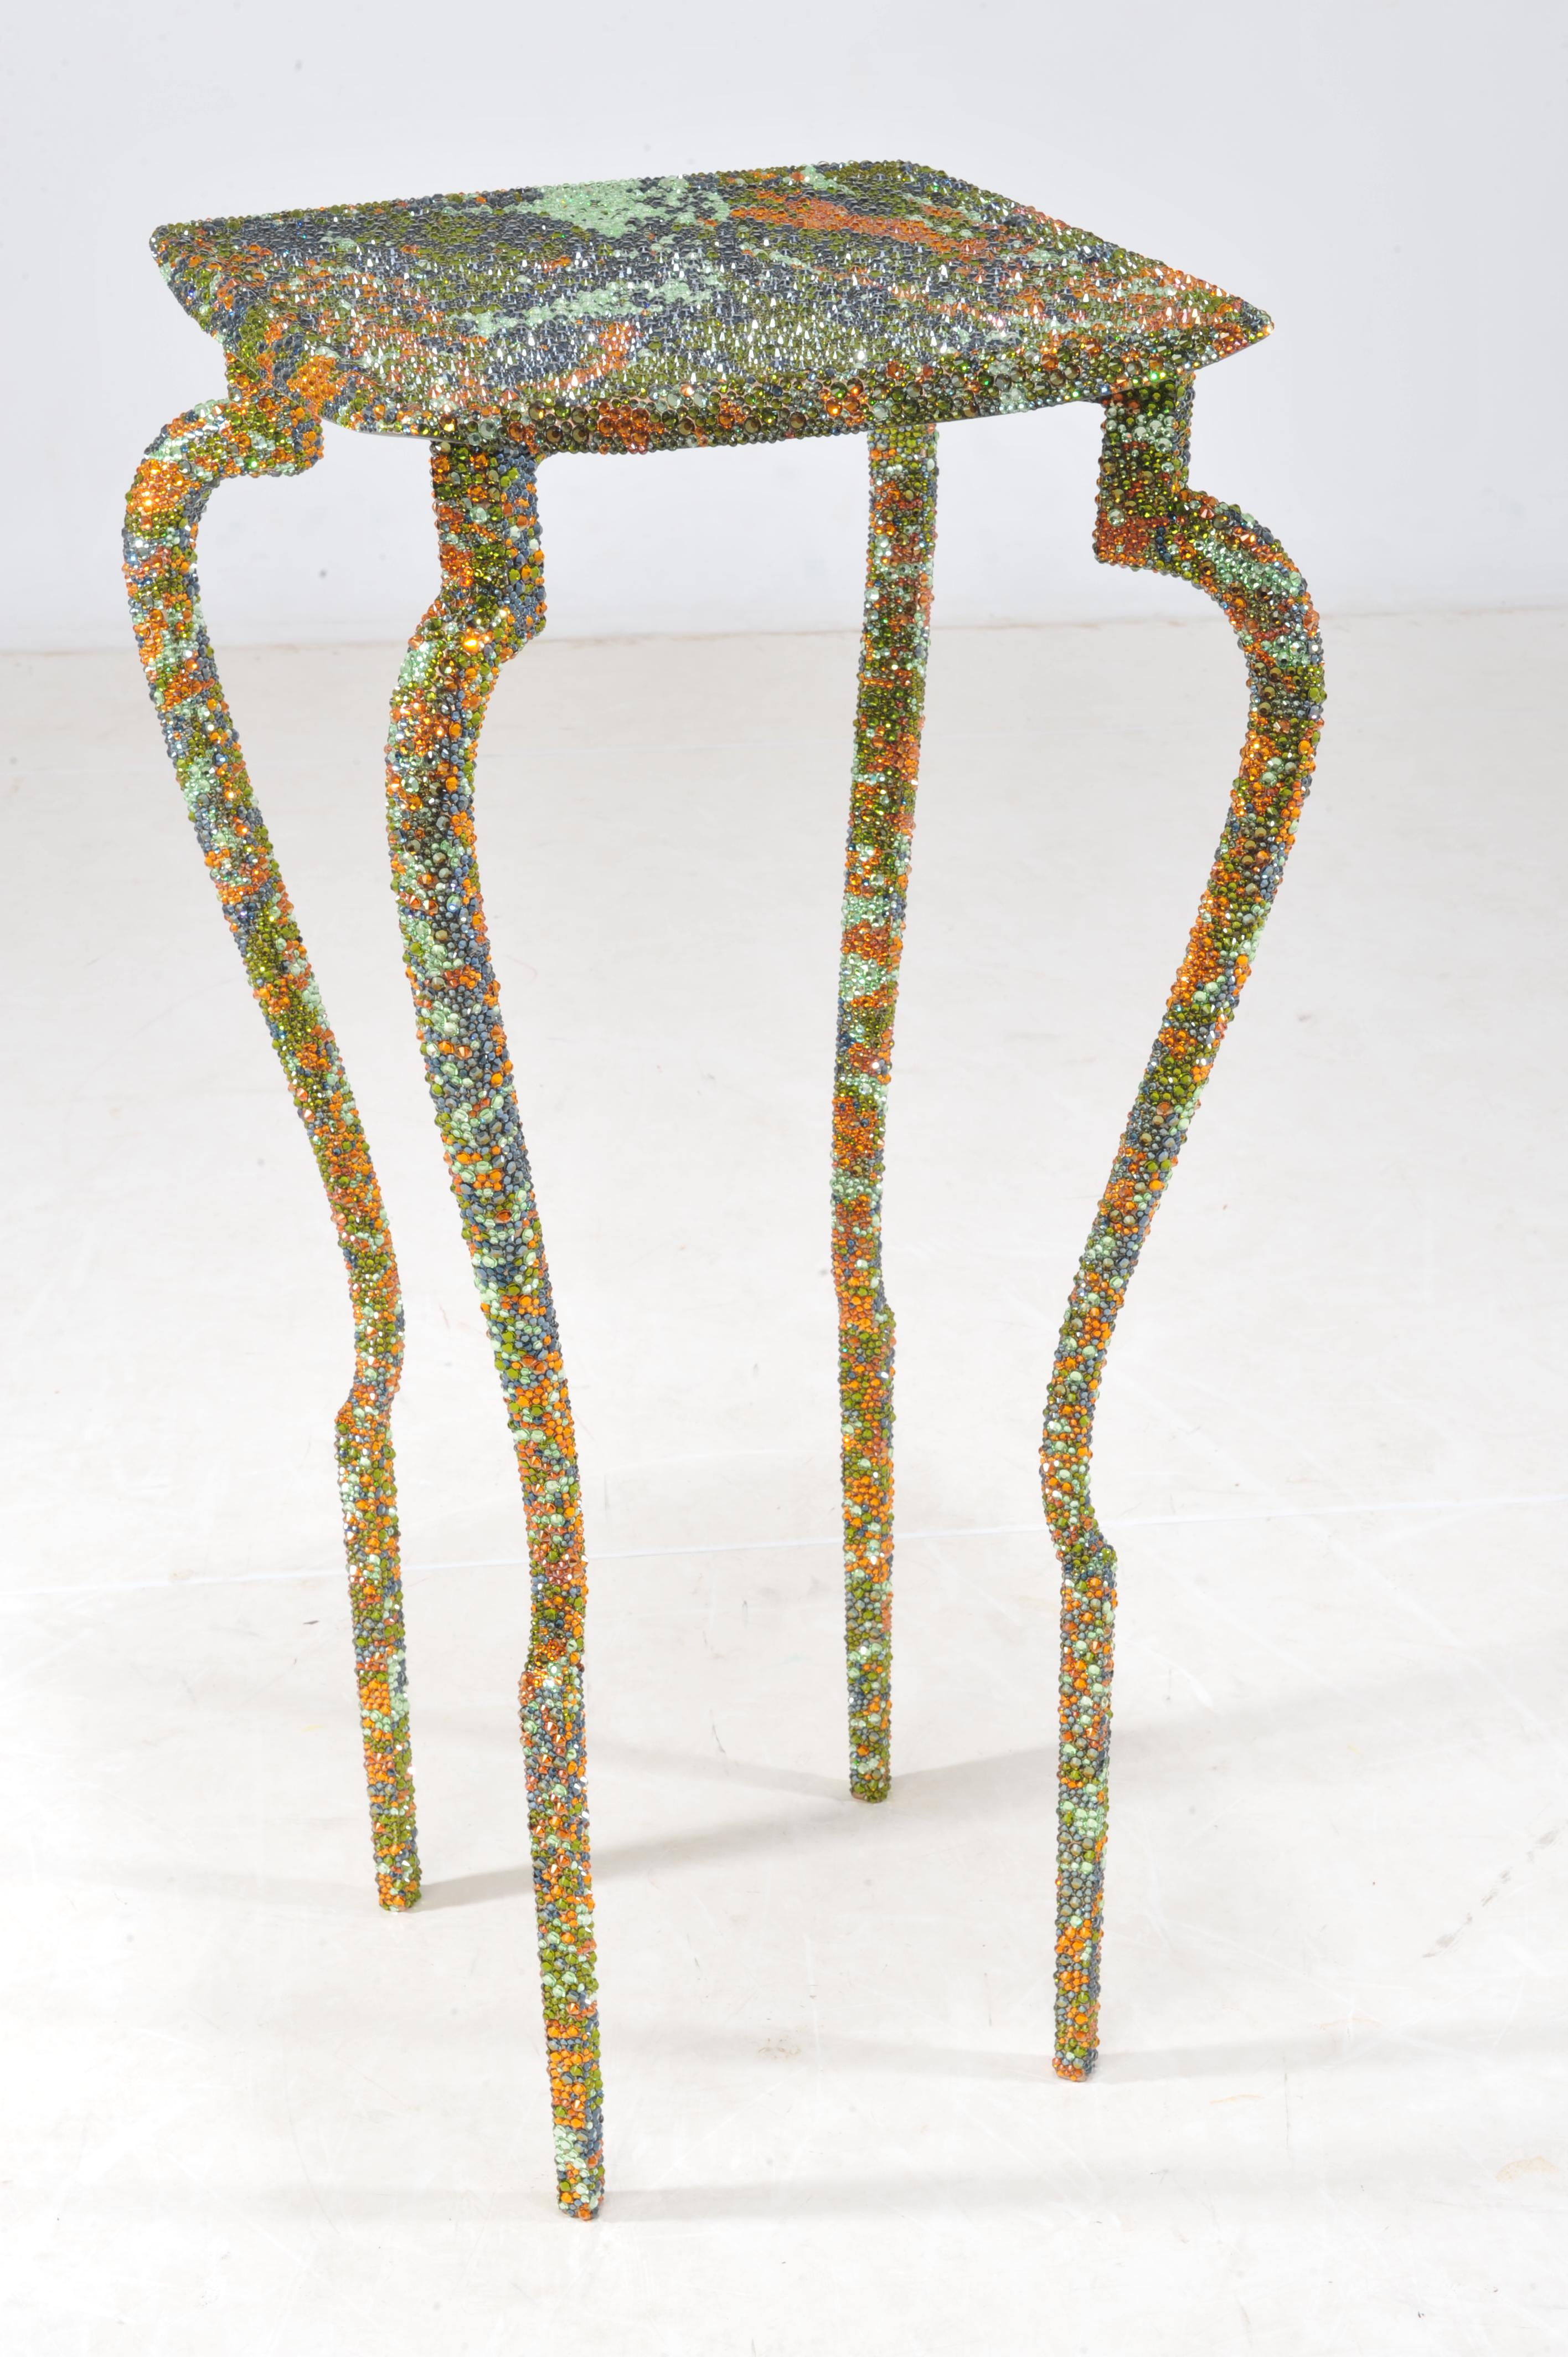 Mark Brazier-Jones, Beluga end table, 2009, Bronze and Swarovski crystals, 40 x 40 x 88cm 

The Beluga end table is inspired by the sheer opulence of Russian 18th Century faceted metal furniture produced in Tula-a style of furniture that was